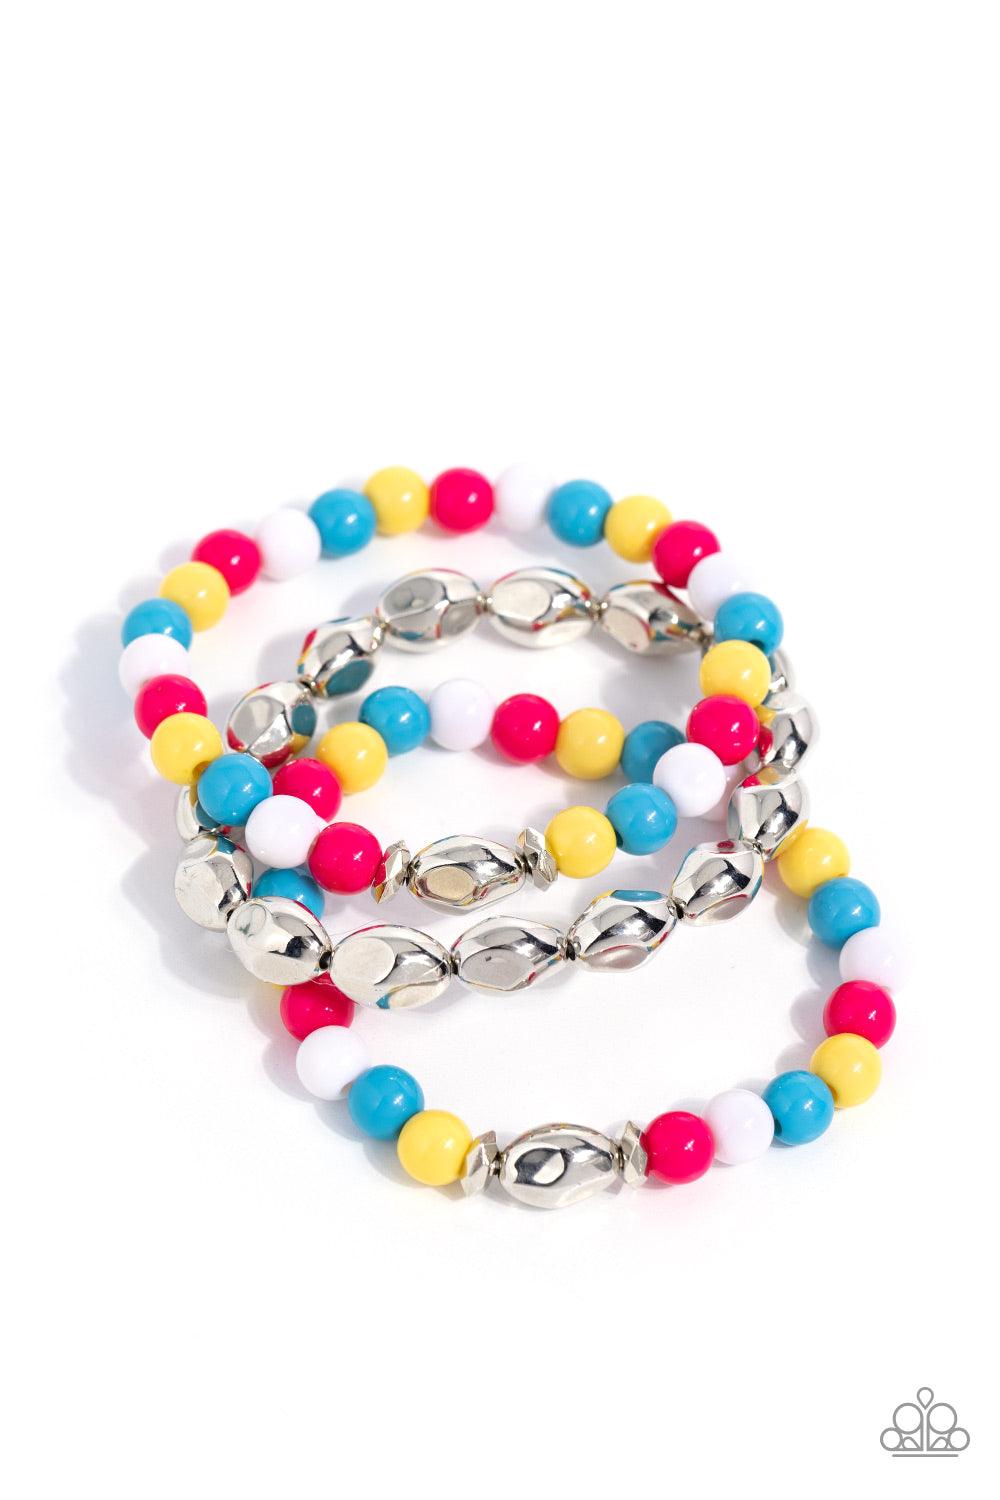 Paparazzi Accessories - The Candy Man Can - Multicolor Bracelets - Bling by JessieK